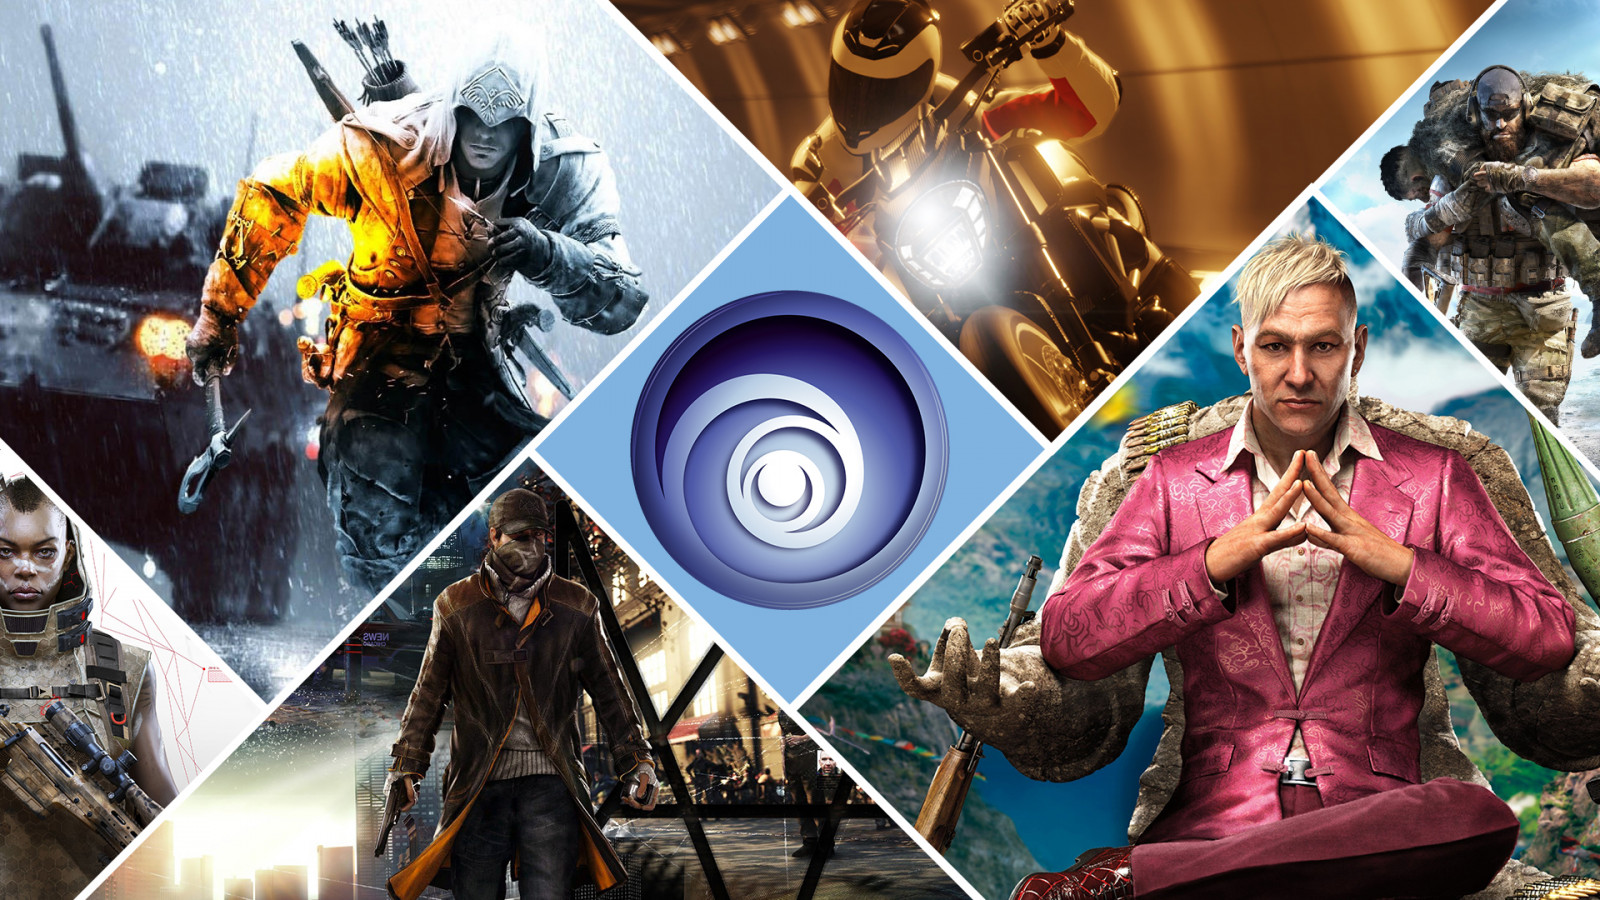 Ubisoft will be returning to Steam after a three year absence - Xfire